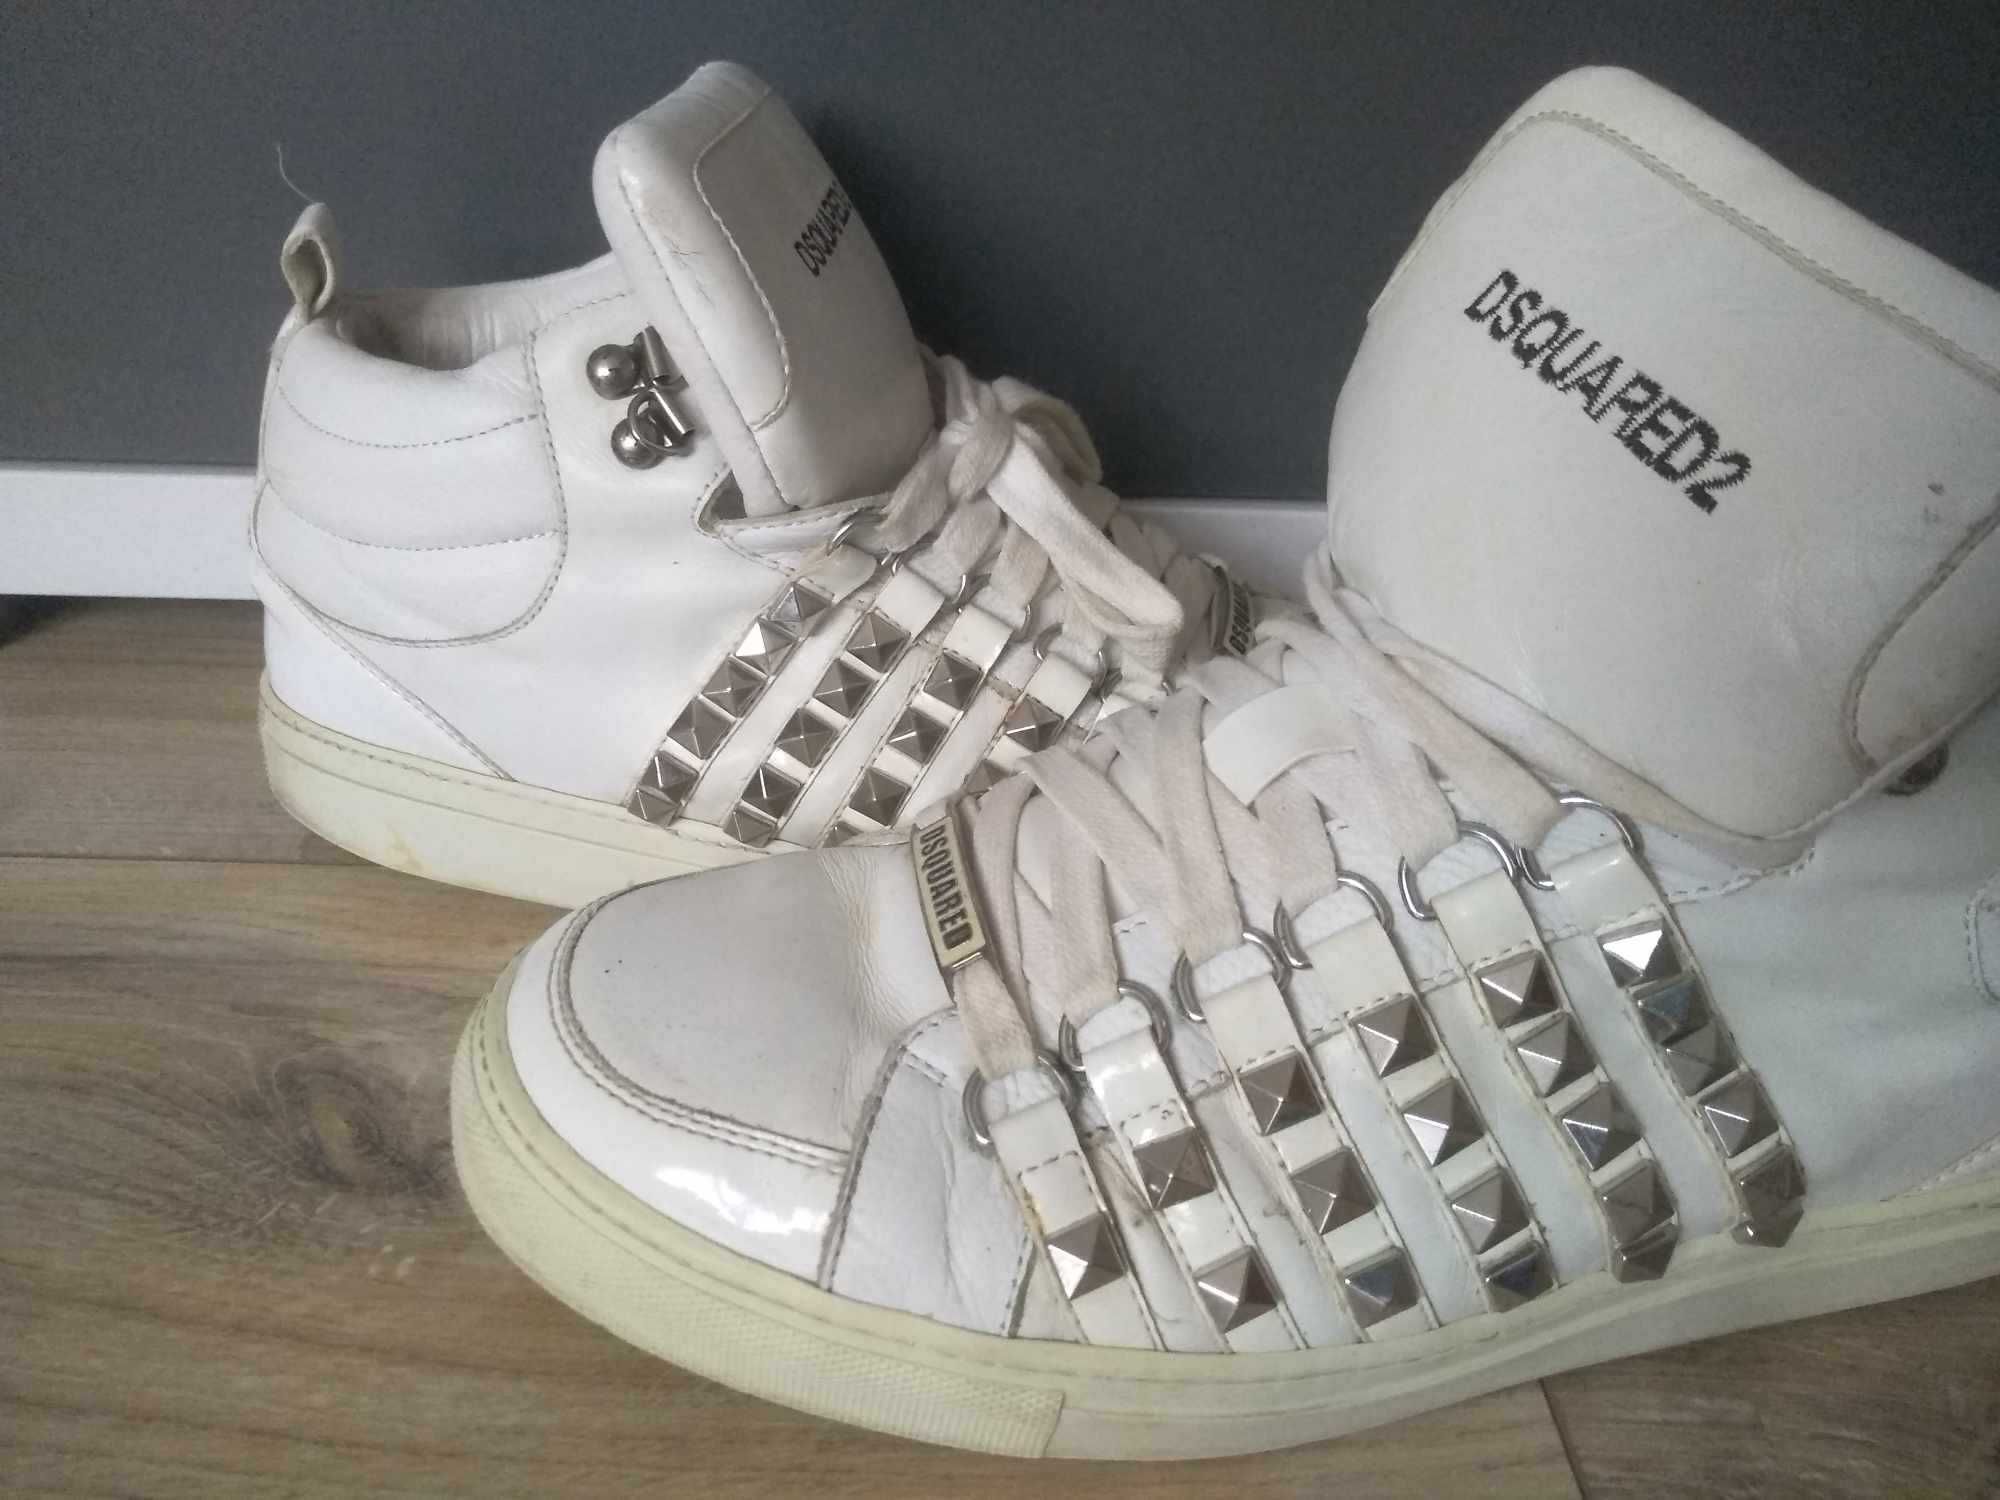 Dsquared 2 stud sneakers size 43